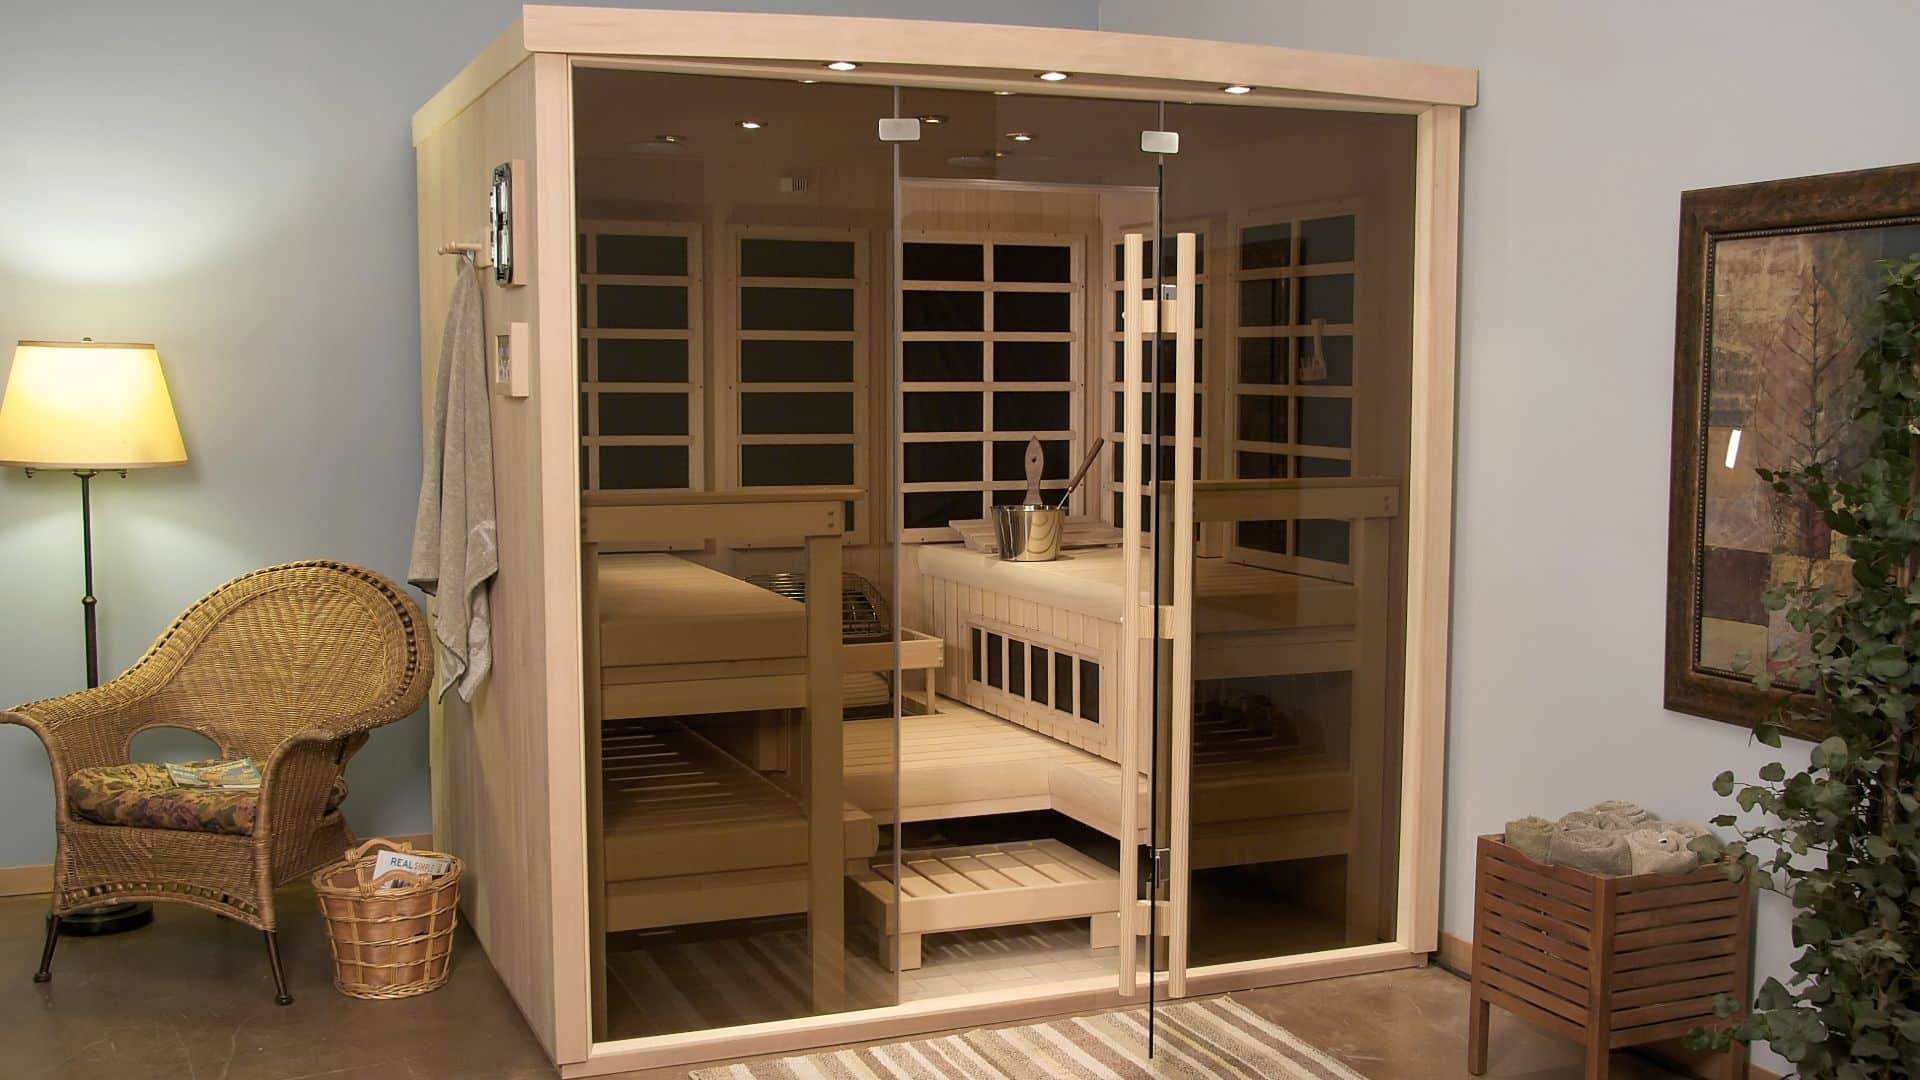 How to Care for an Infrared Sauna